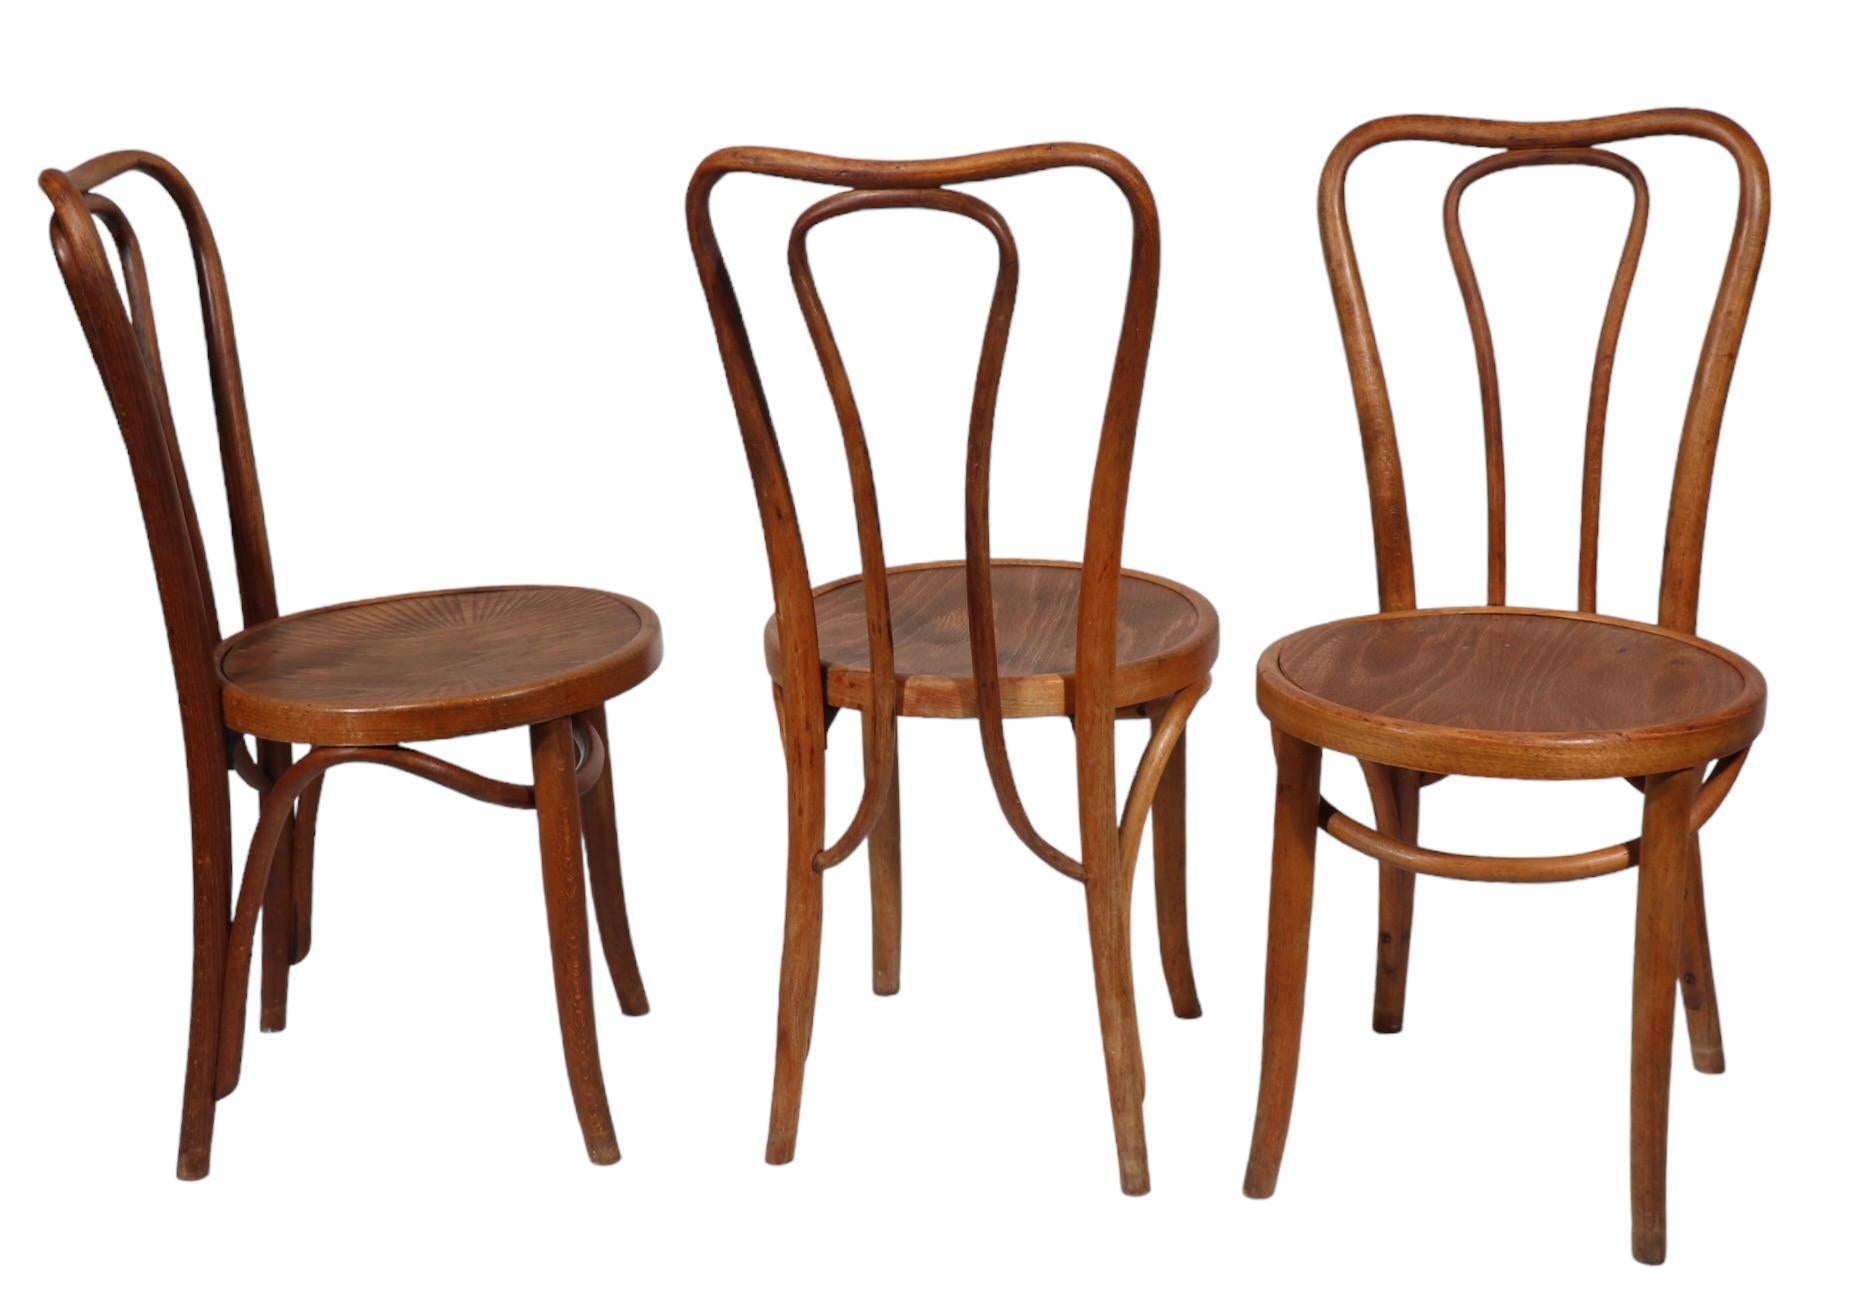 Vienna Secessionist Bentwood Chairs att. to Thonet  Made in Poland 3 available  1